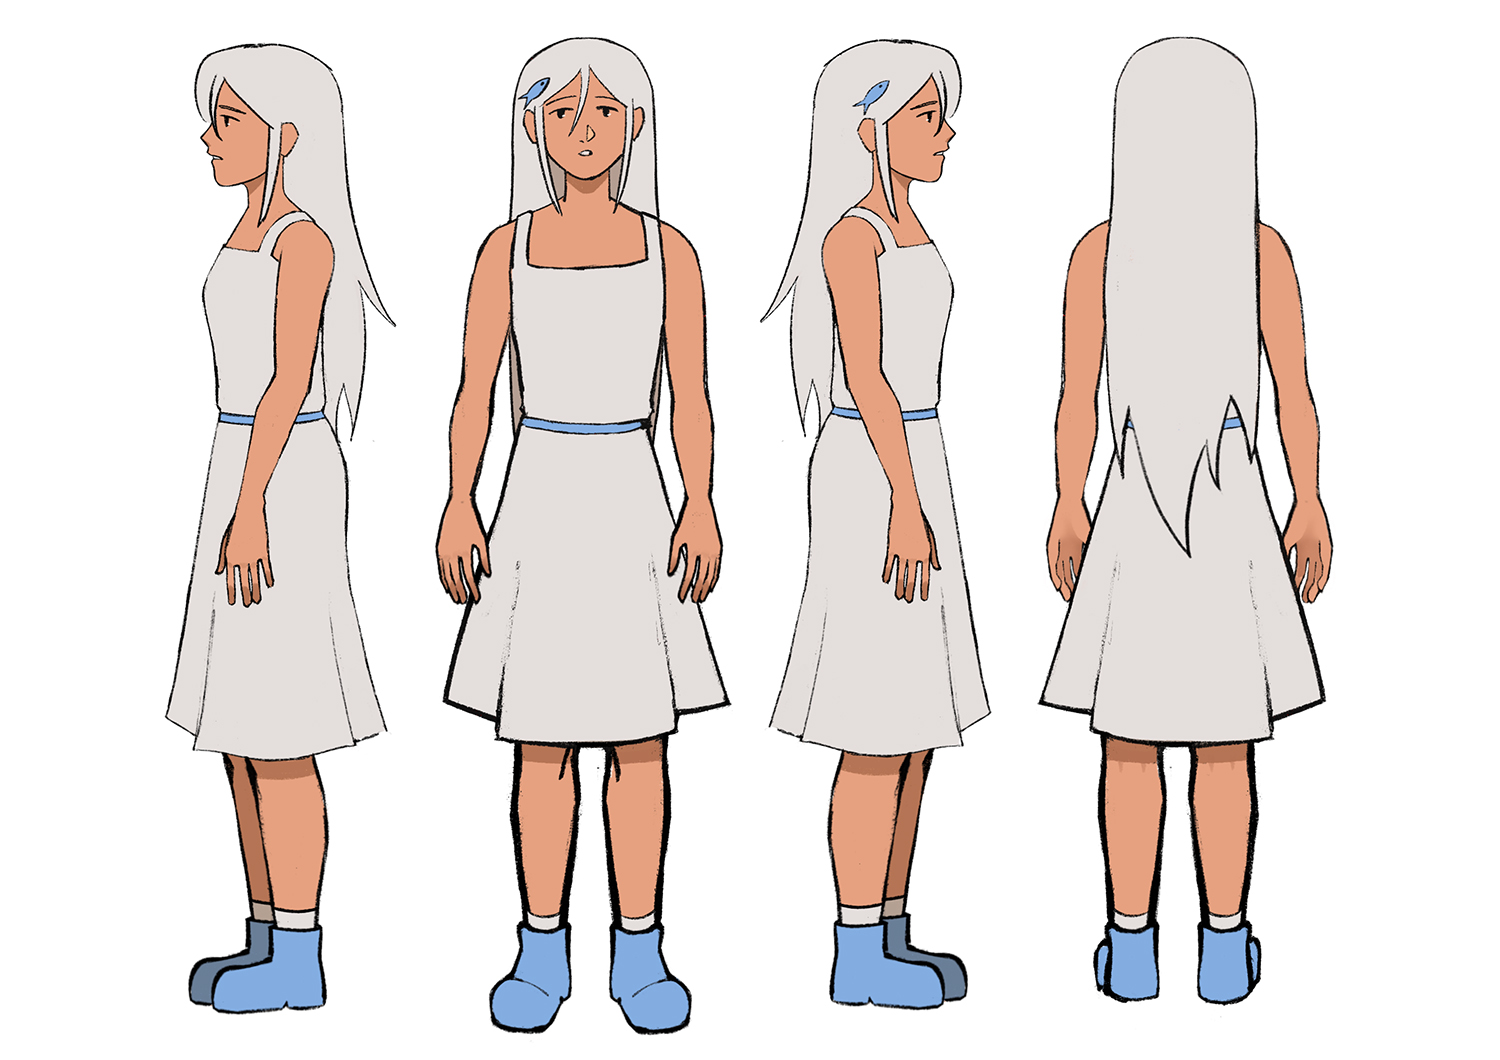 Four illustrations of white-haired woman from different angles